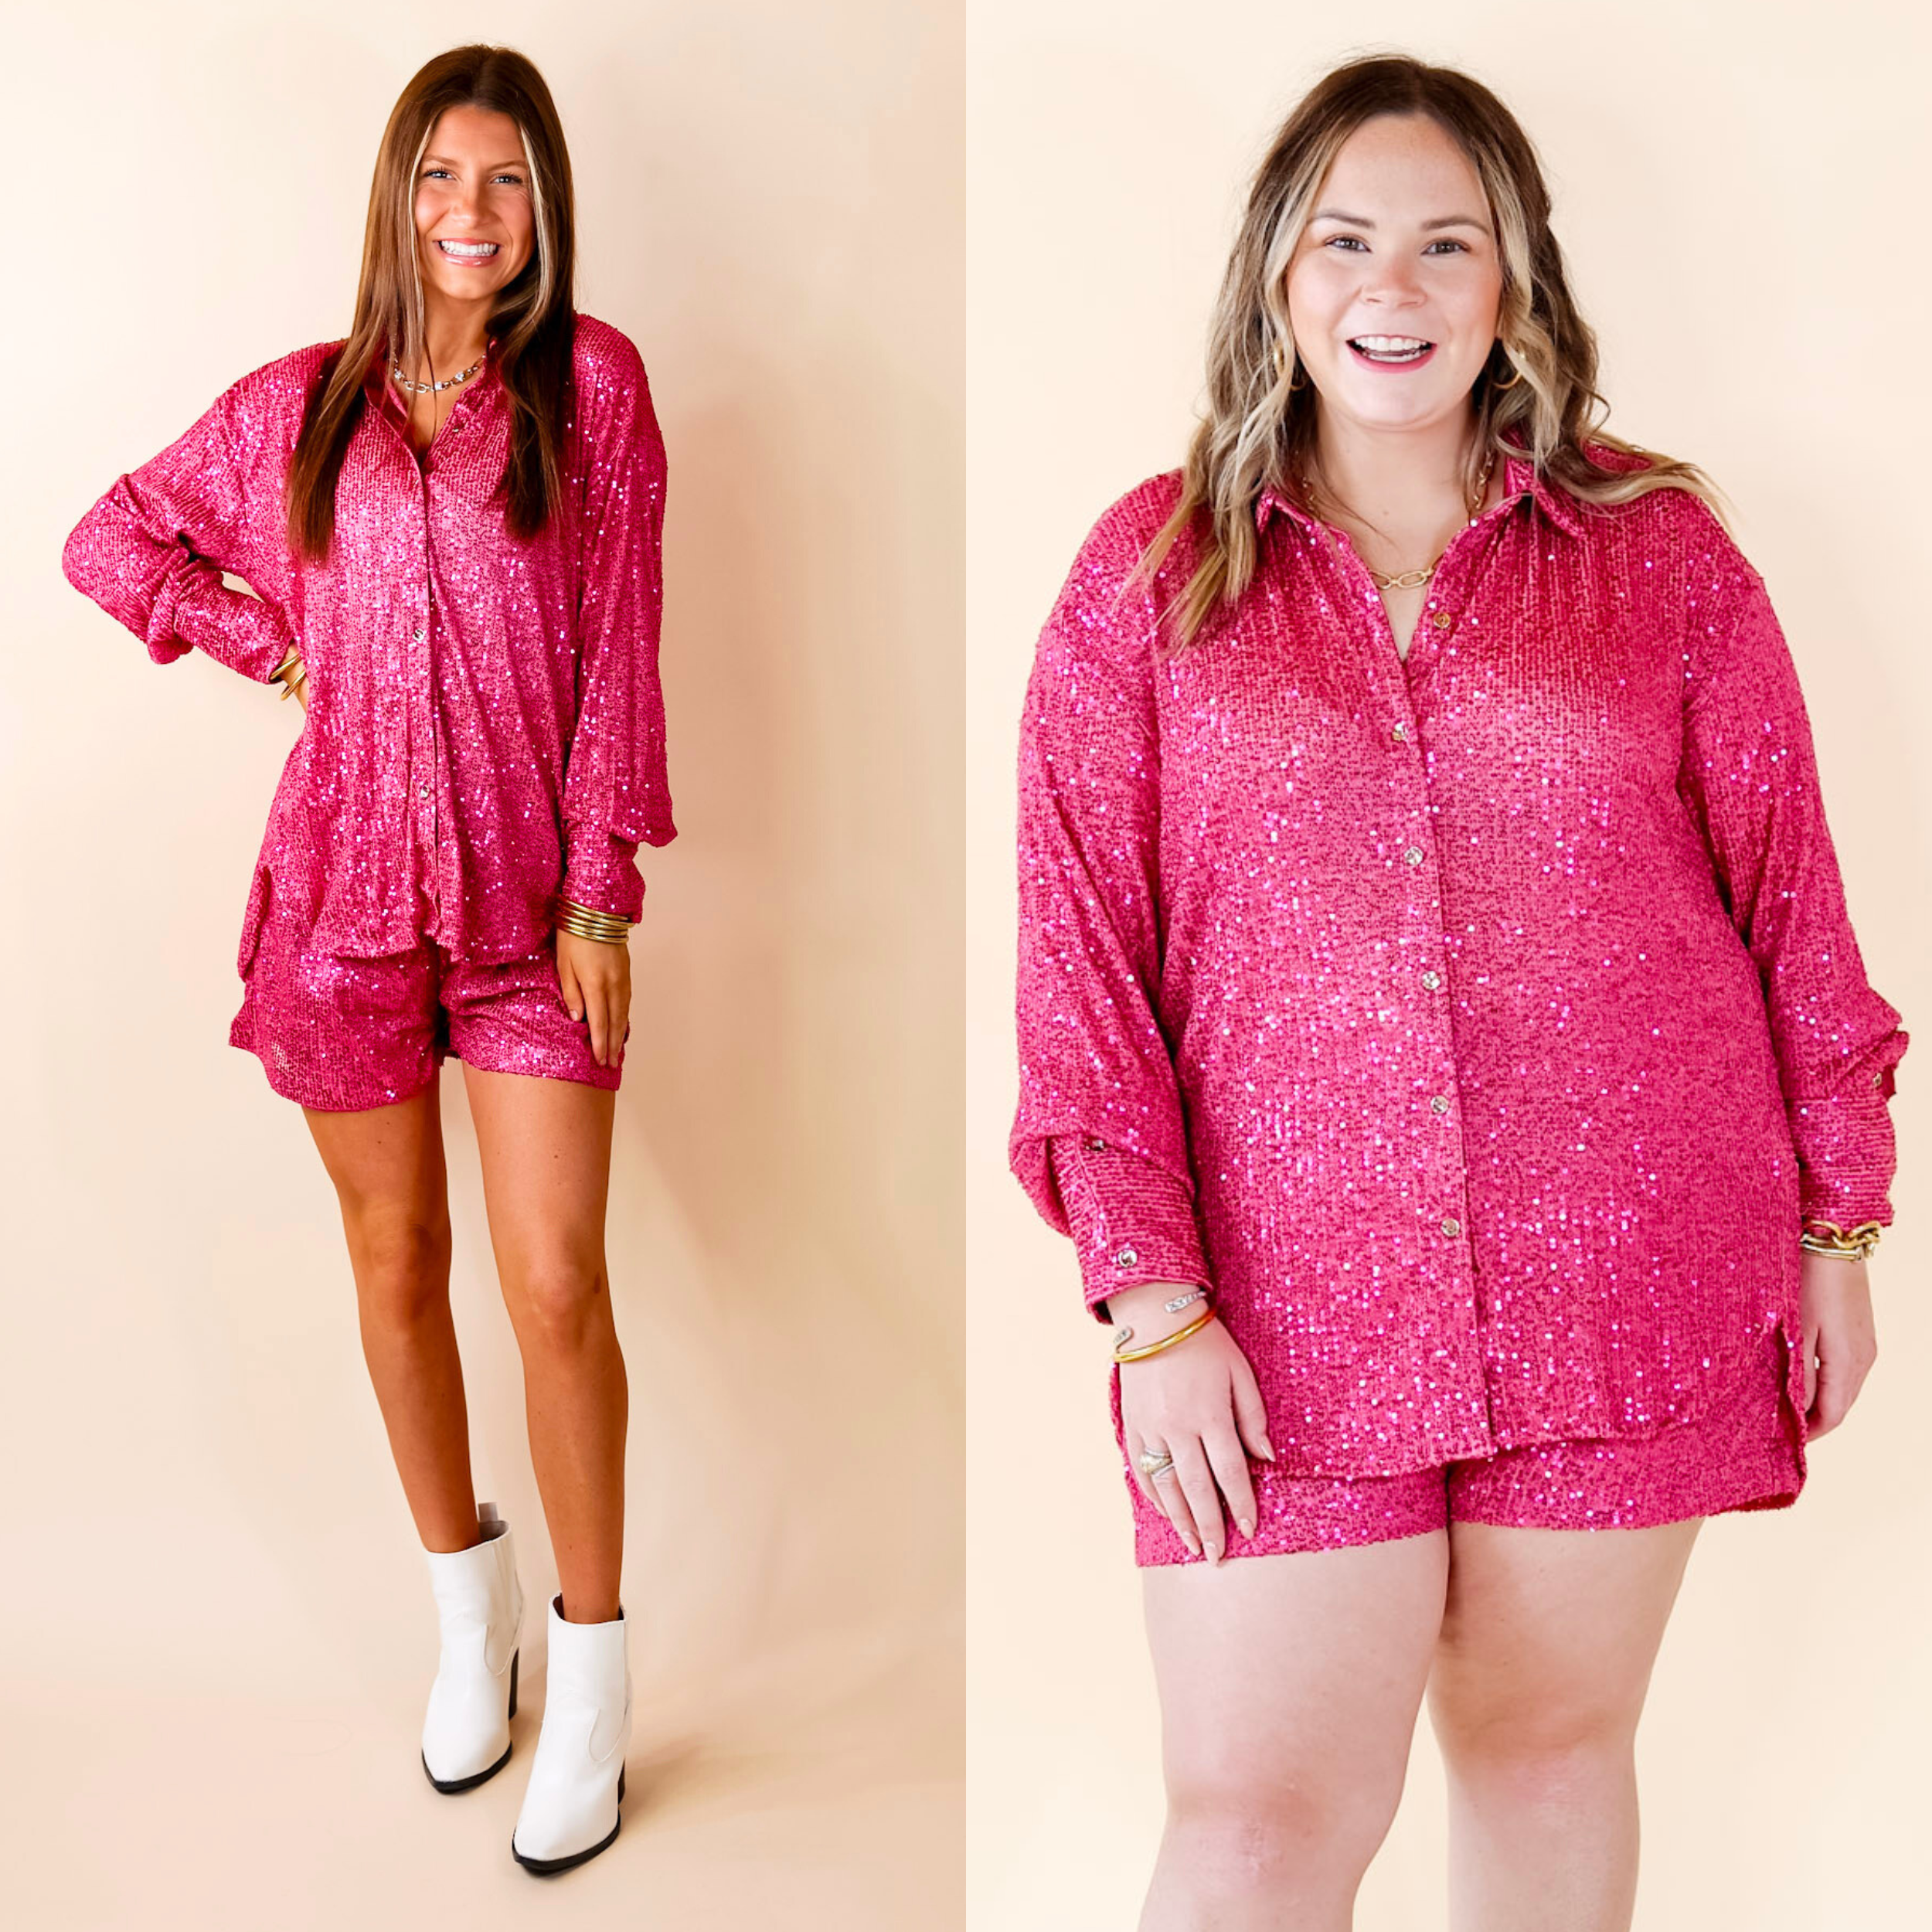 Model is wearing a fuchsia sequin button up. Model has paired the top with the matching shorts, white booties, and gold tone jewelry.